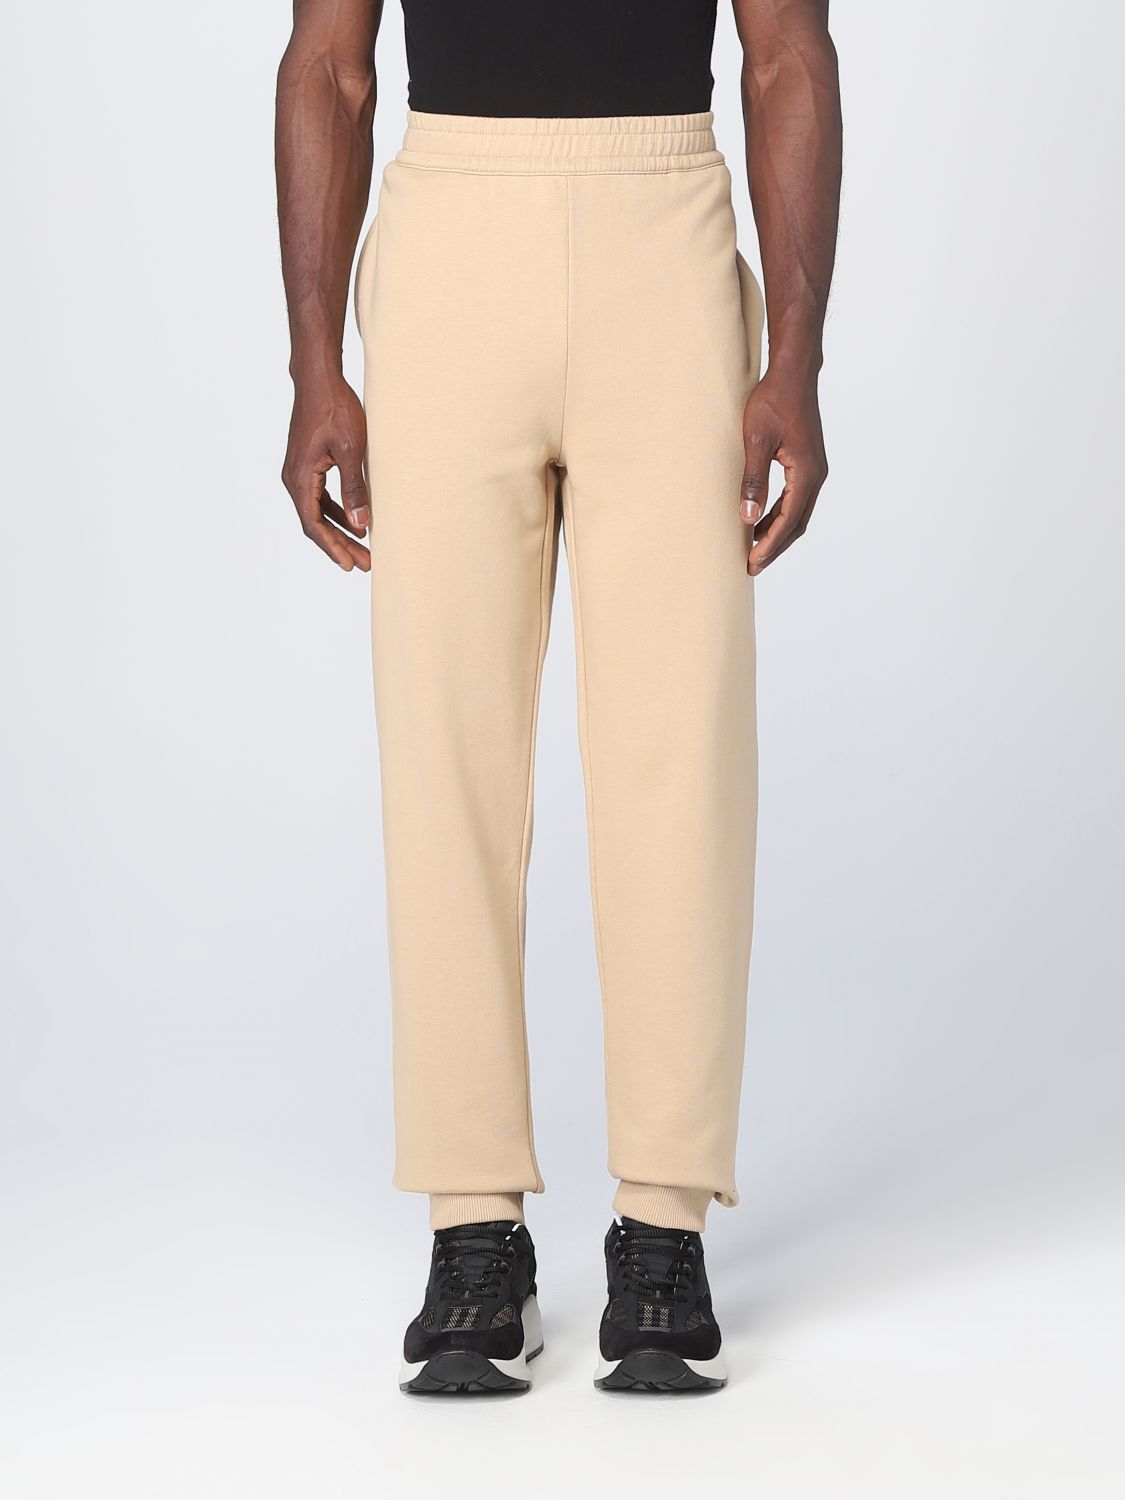 BURBERRY: pants for man - Beige | Burberry pants 8068465 online on ...